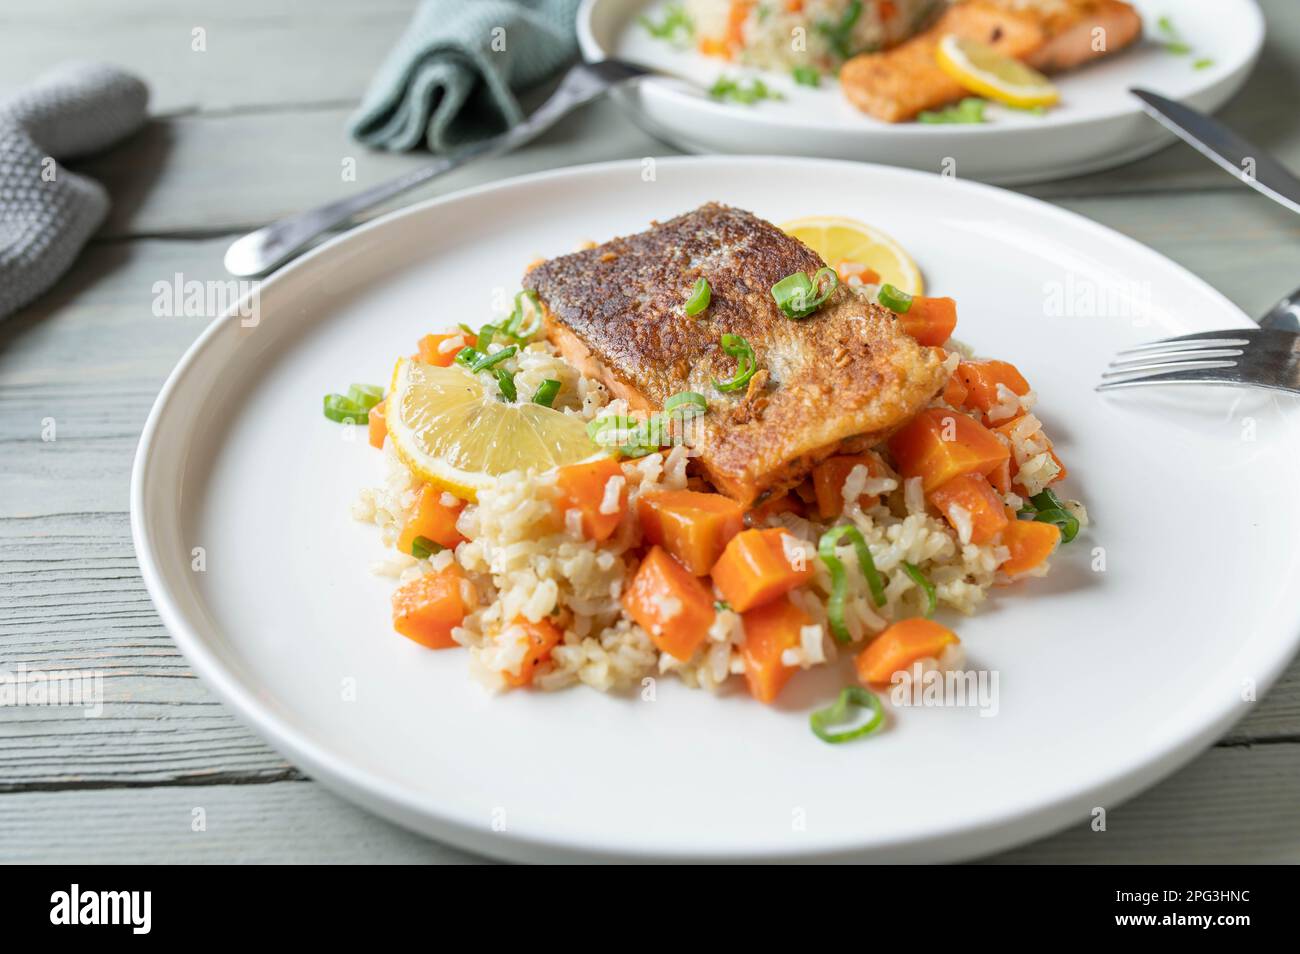 Fried salmon with skin served with brown rice and vegetables on a plate Stock Photo